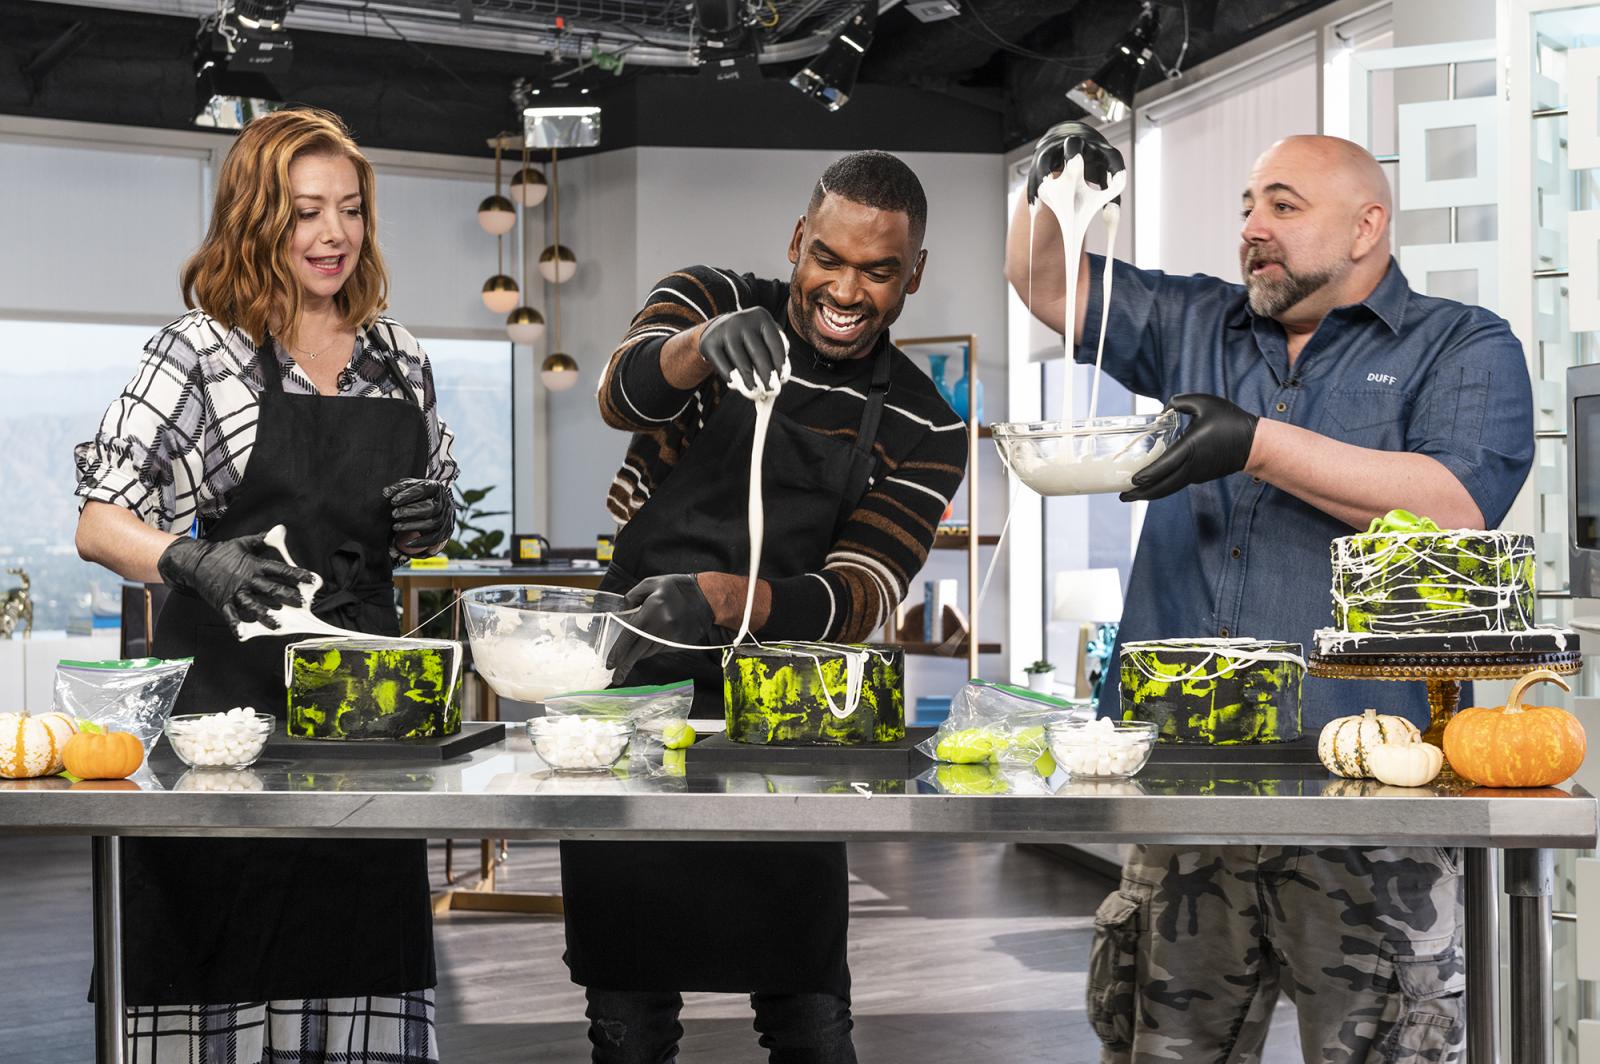 Image from On Set - Alyson Hannigan, Justin Sylvester and Duff Goldman on E!...